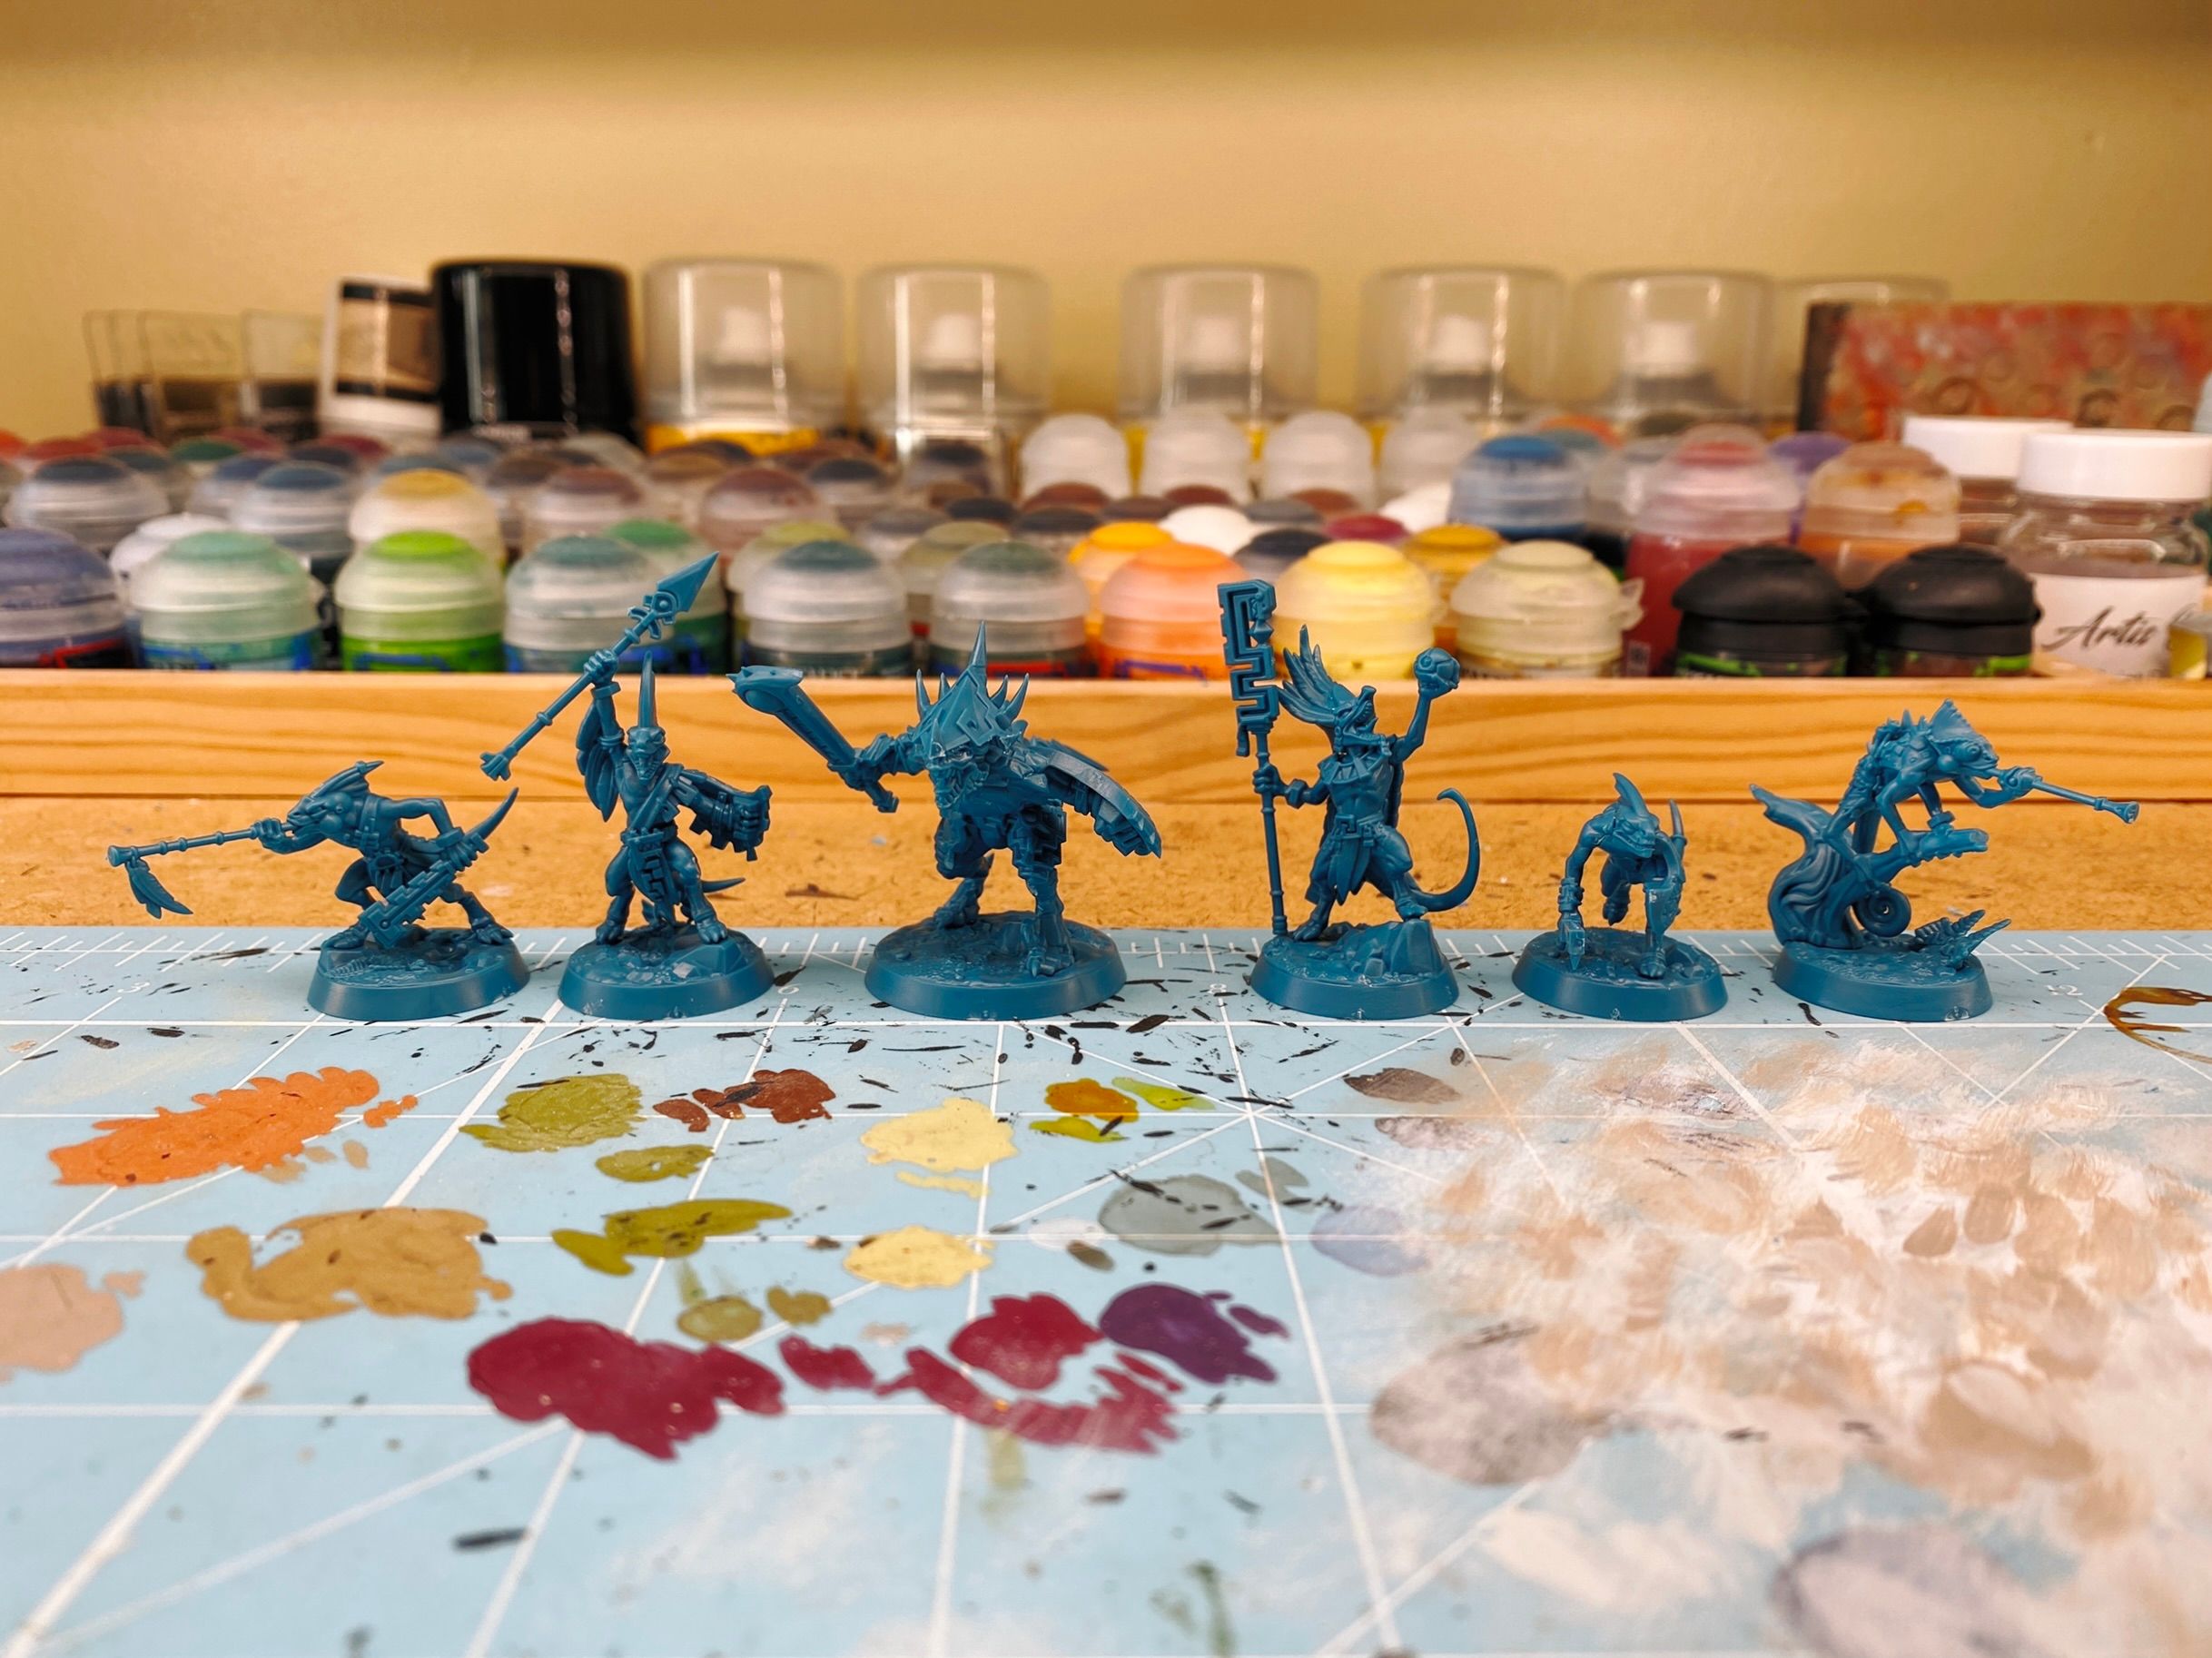 A photo of the Starblood Stalkers warband assembled, in torquoise-coloured plastic. Six miniatures, all lizards. One has a blowpipe, another has a spear raised above his head, the third is slinking along. Another is a chameleon with a blowpipe, the fifth has an elaborate staff and is holding a small ball up in triumph, and the last is a big heavily-armoured chonker.